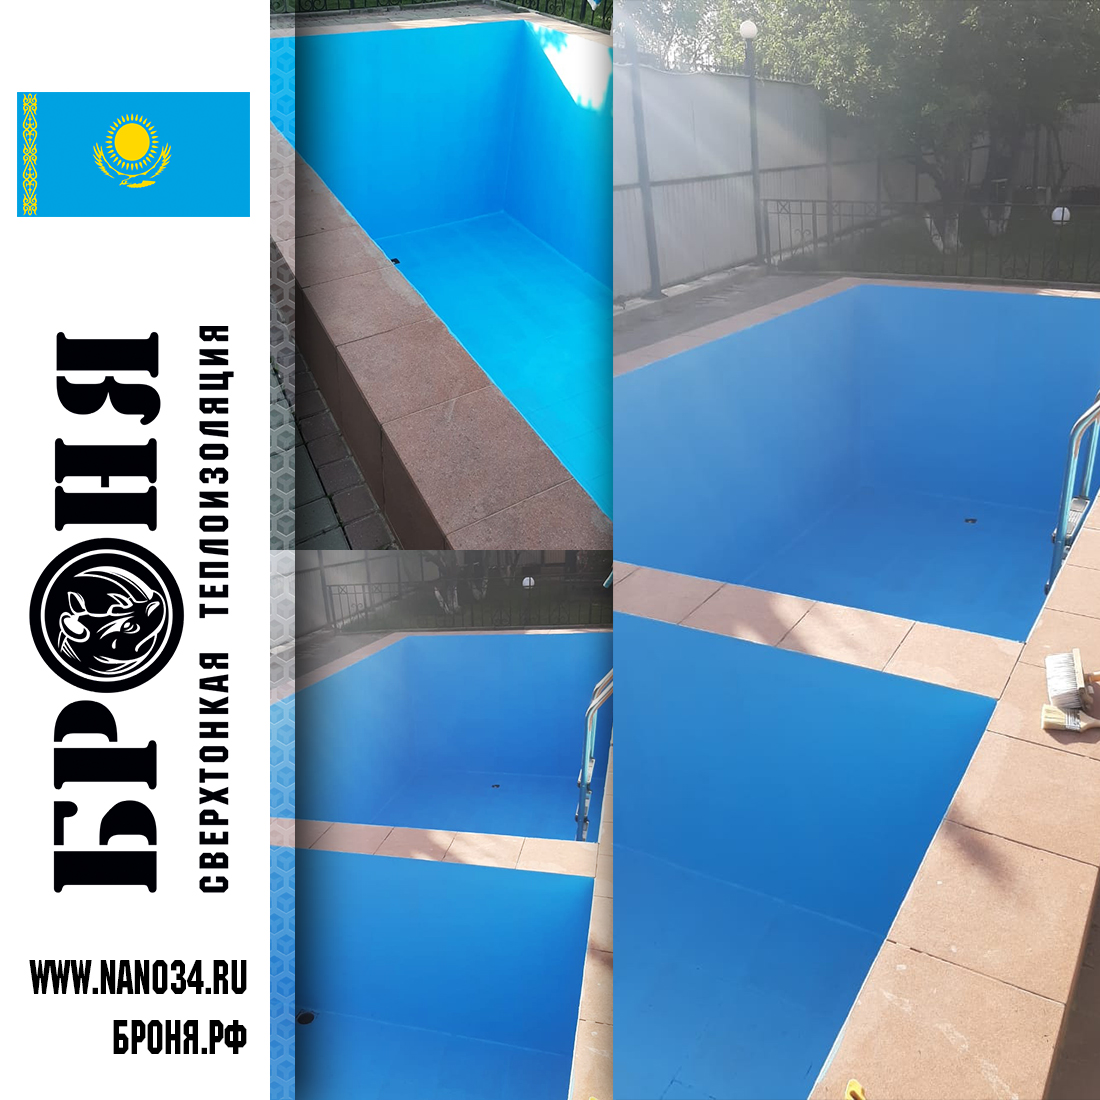 Application Bronya Aquablock with reinforcement for waterproofing the pool of a private house Alma-Ata, Kazakhstan. (a photo)